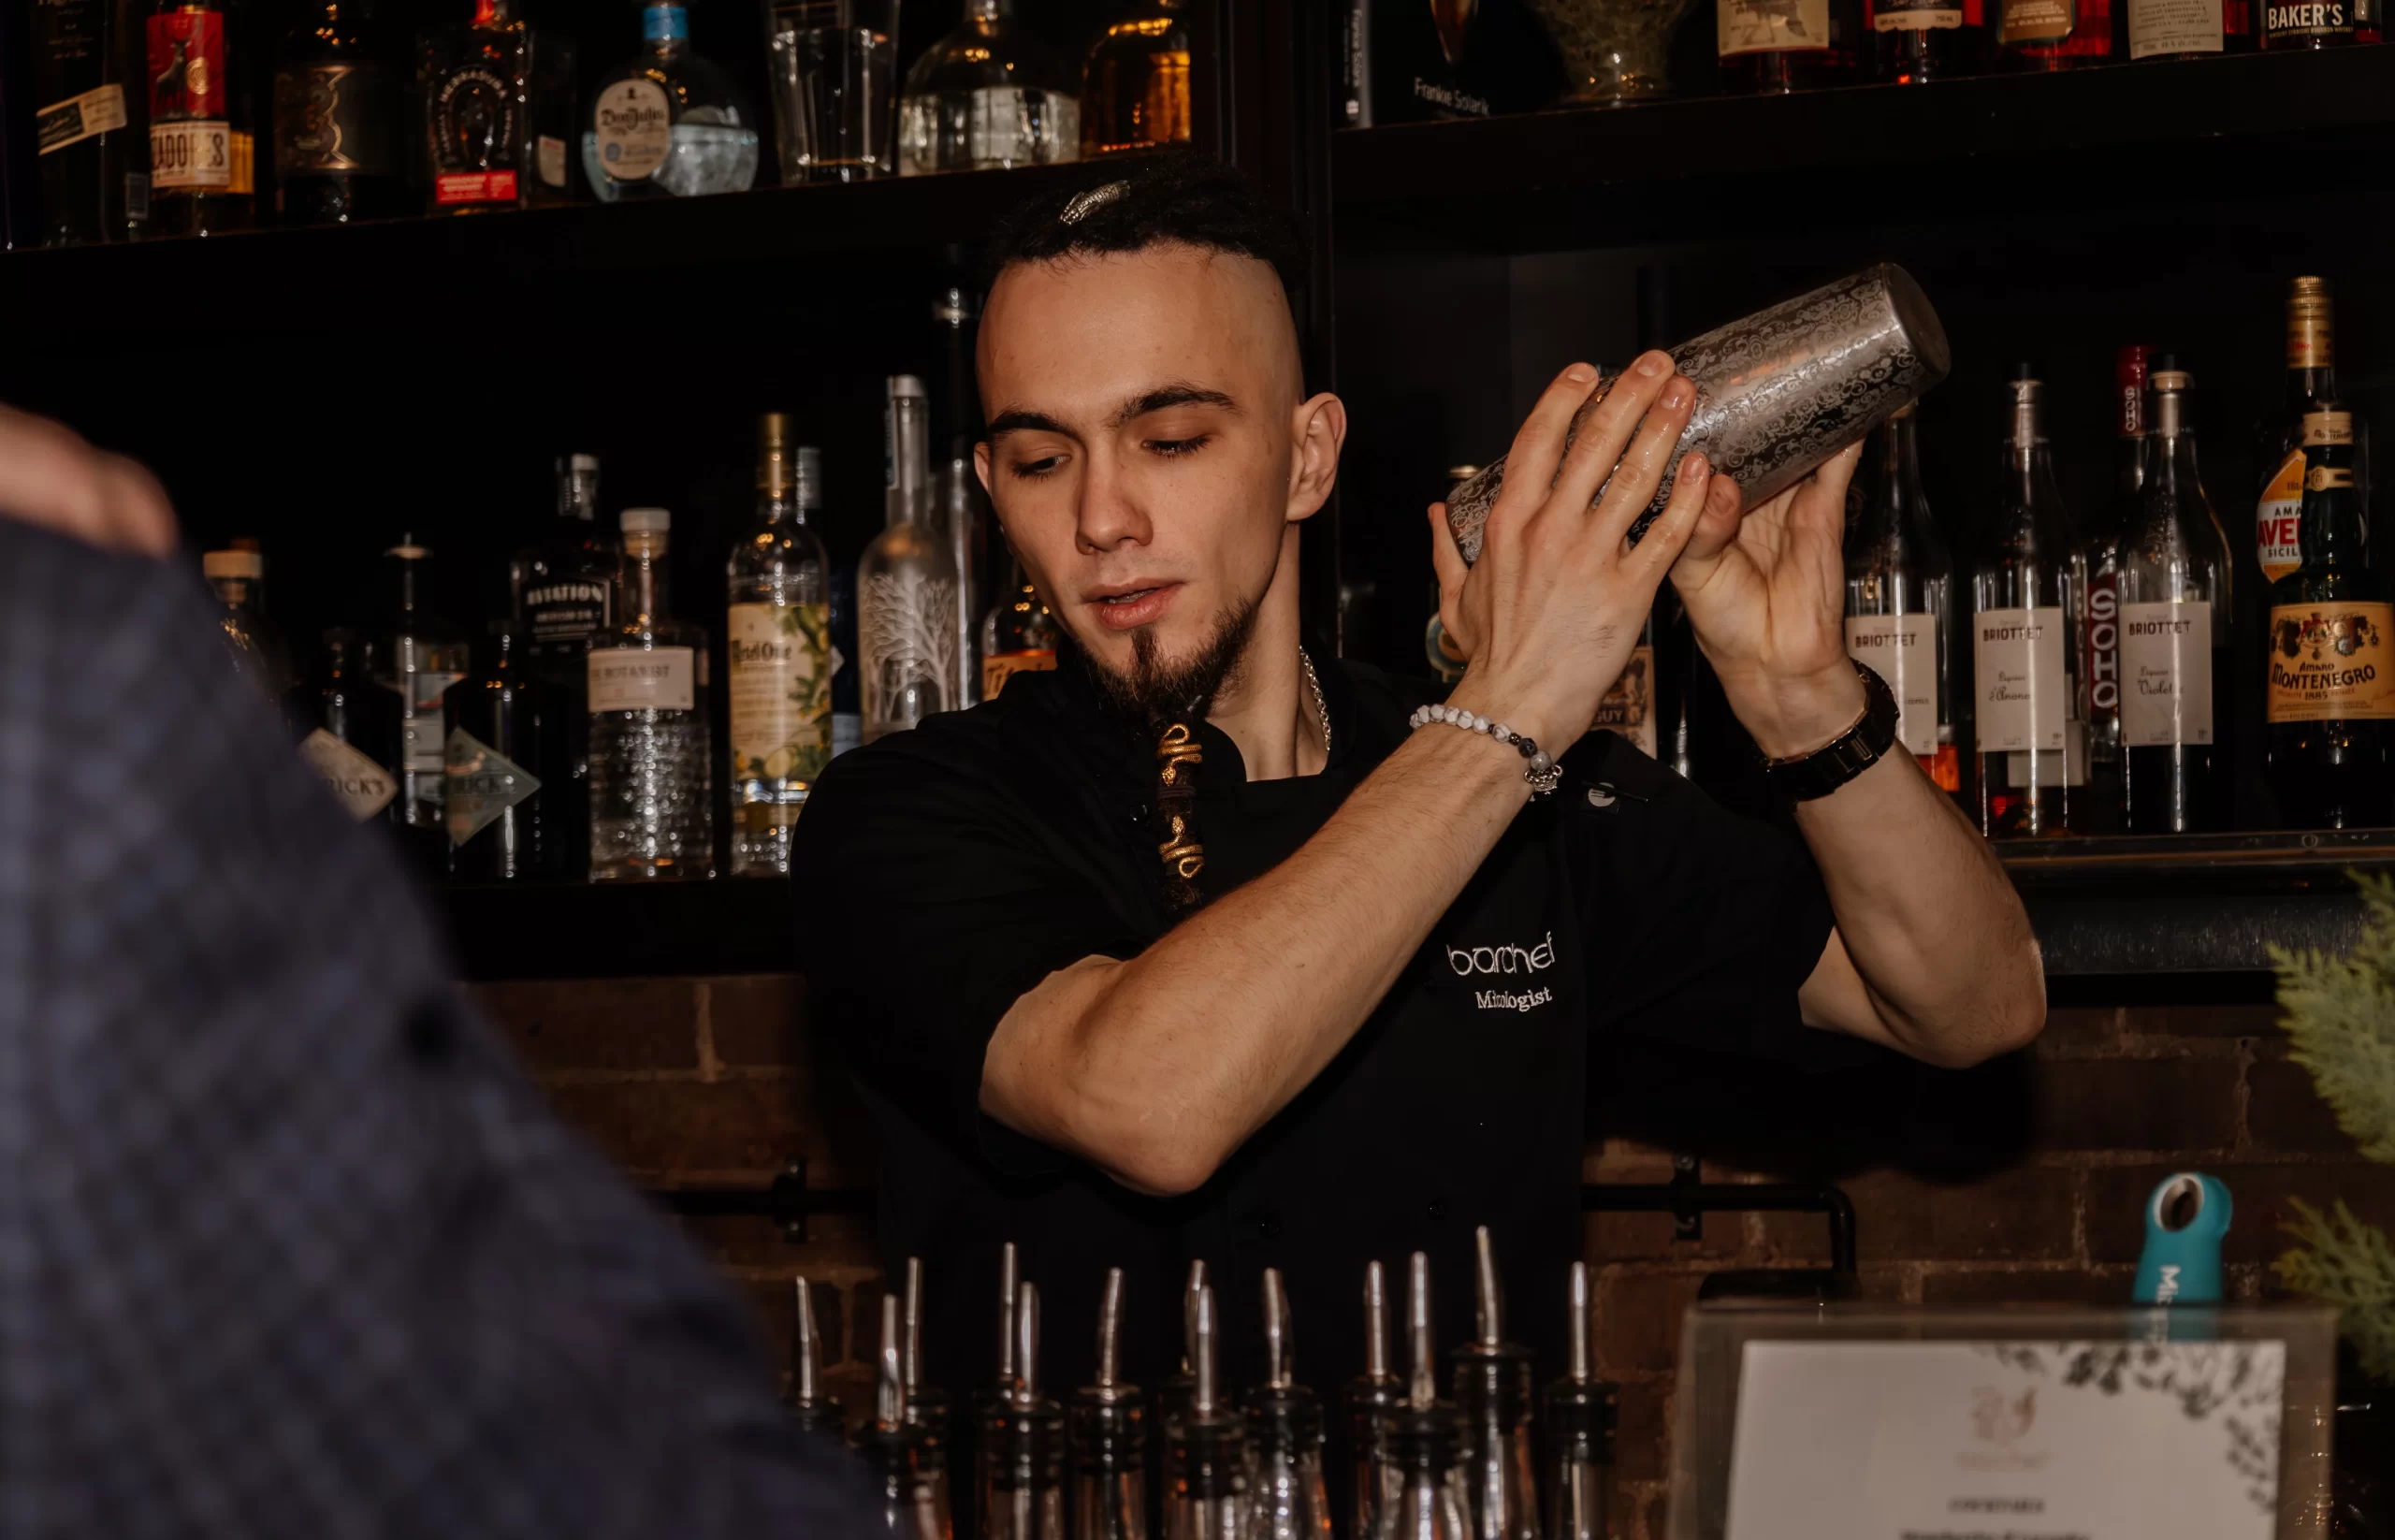 A bartender shaking a cocktail shaker behind the bar